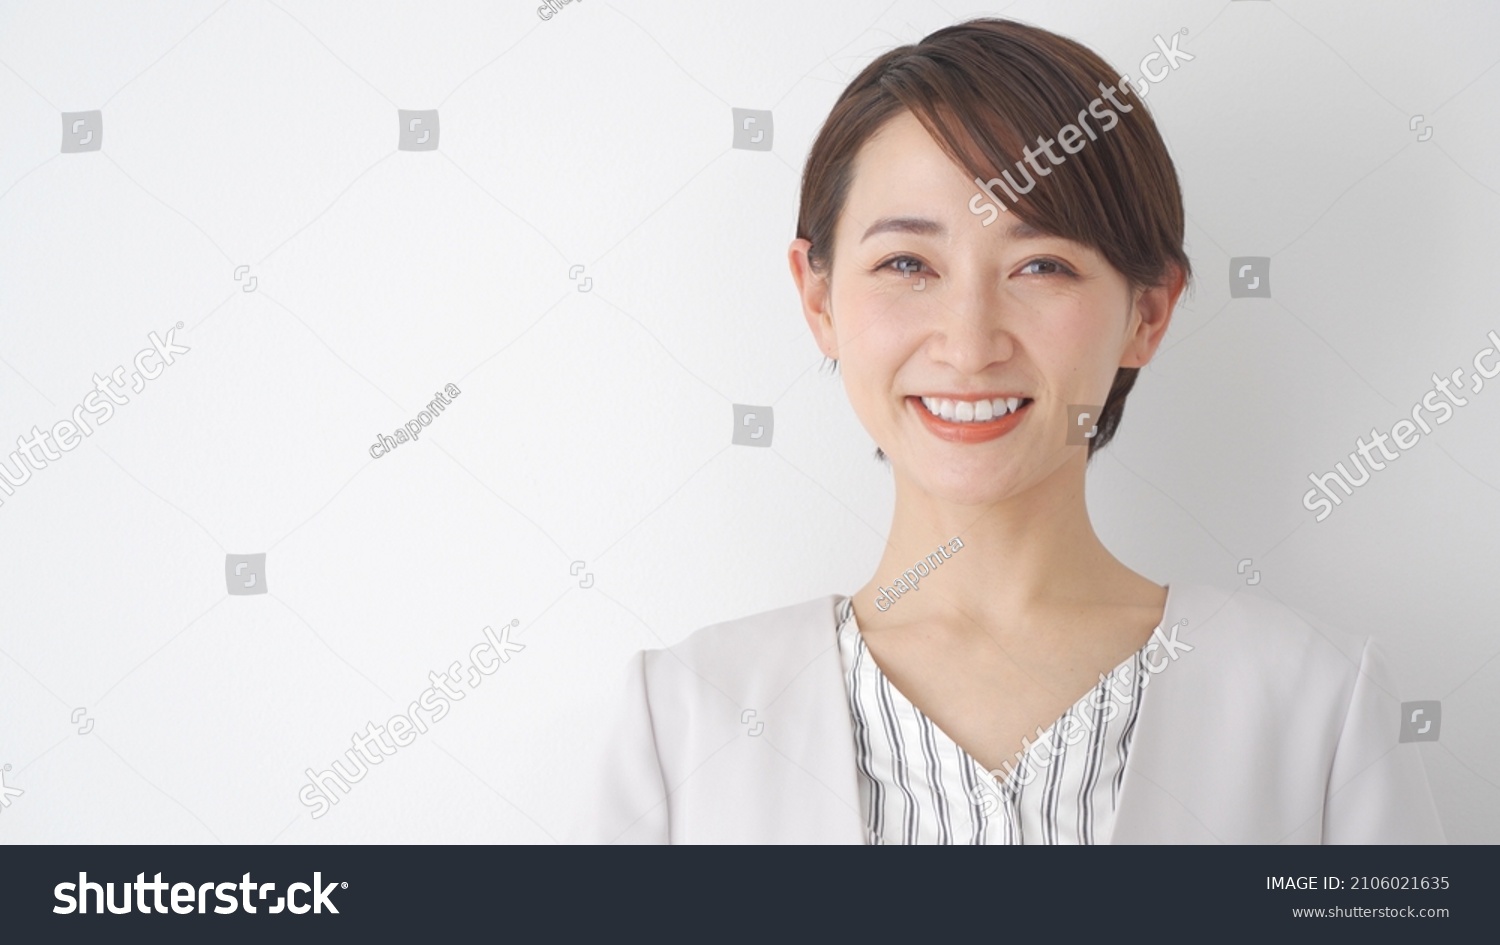 Asian woman looking at the camera with a smile
 #2106021635